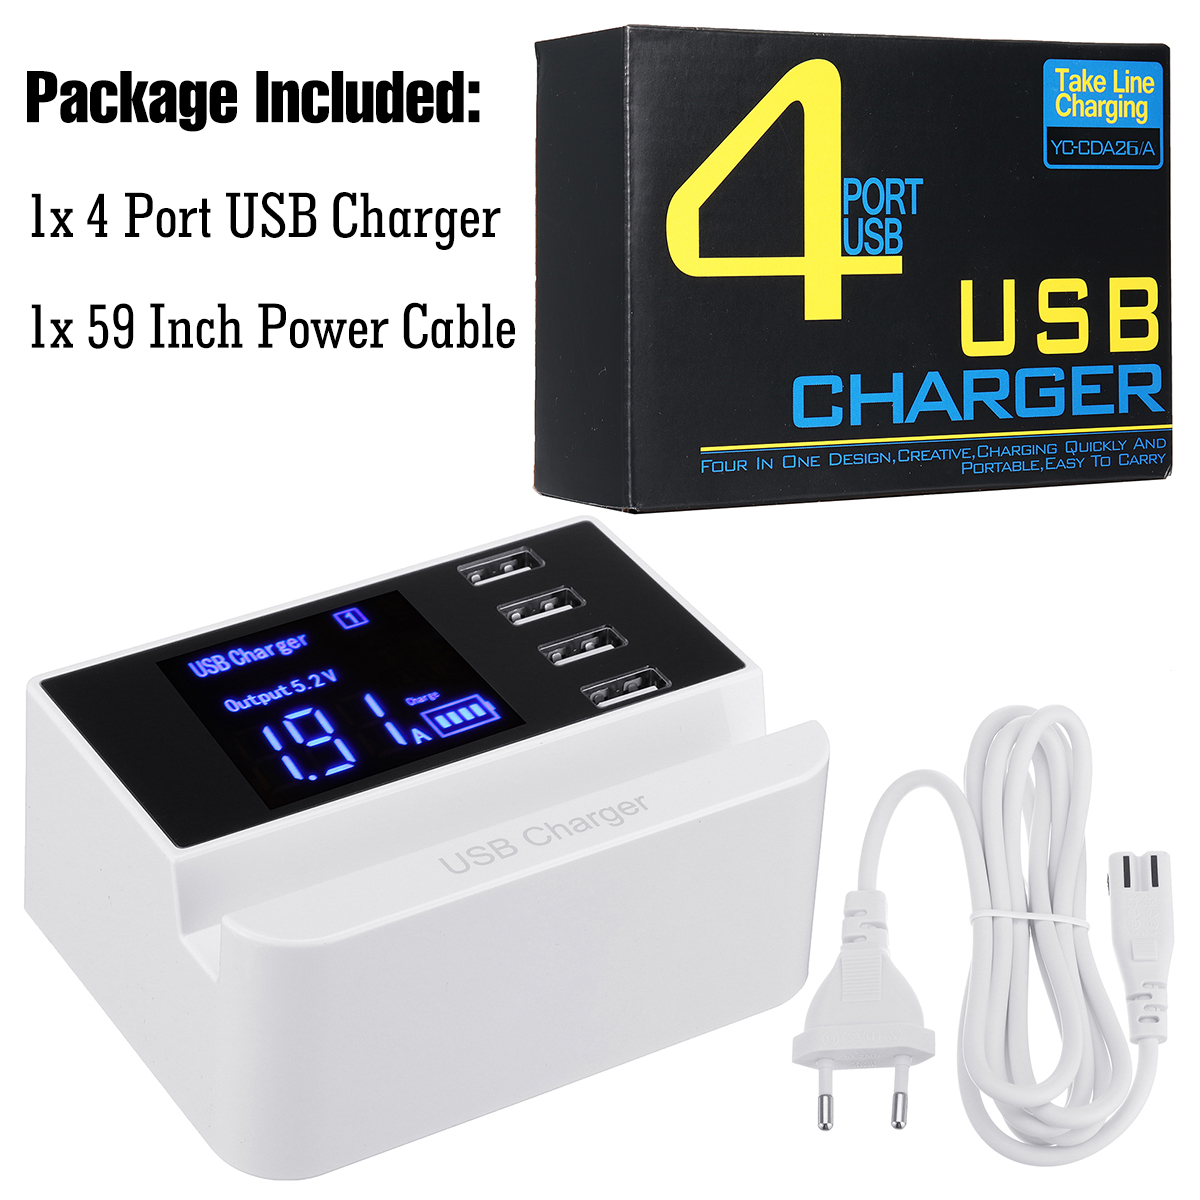 LCD-Display-19-Inch-USB-Charger-Power-Adapter-Desktop-Charging-Station-Phone-Charger-Smart-IC-techno-1235943-14